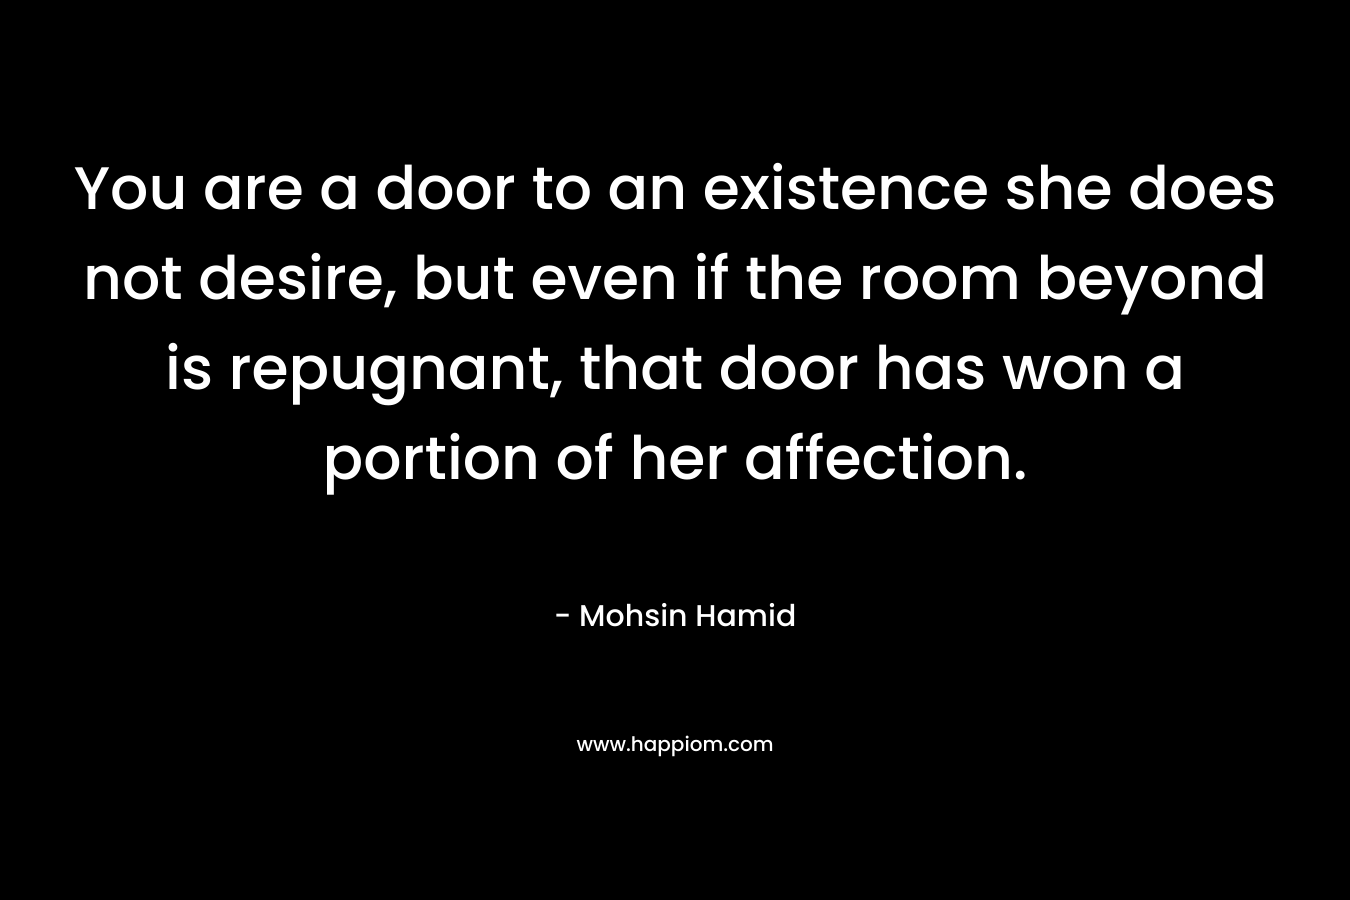 You are a door to an existence she does not desire, but even if the room beyond is repugnant, that door has won a portion of her affection. – Mohsin Hamid